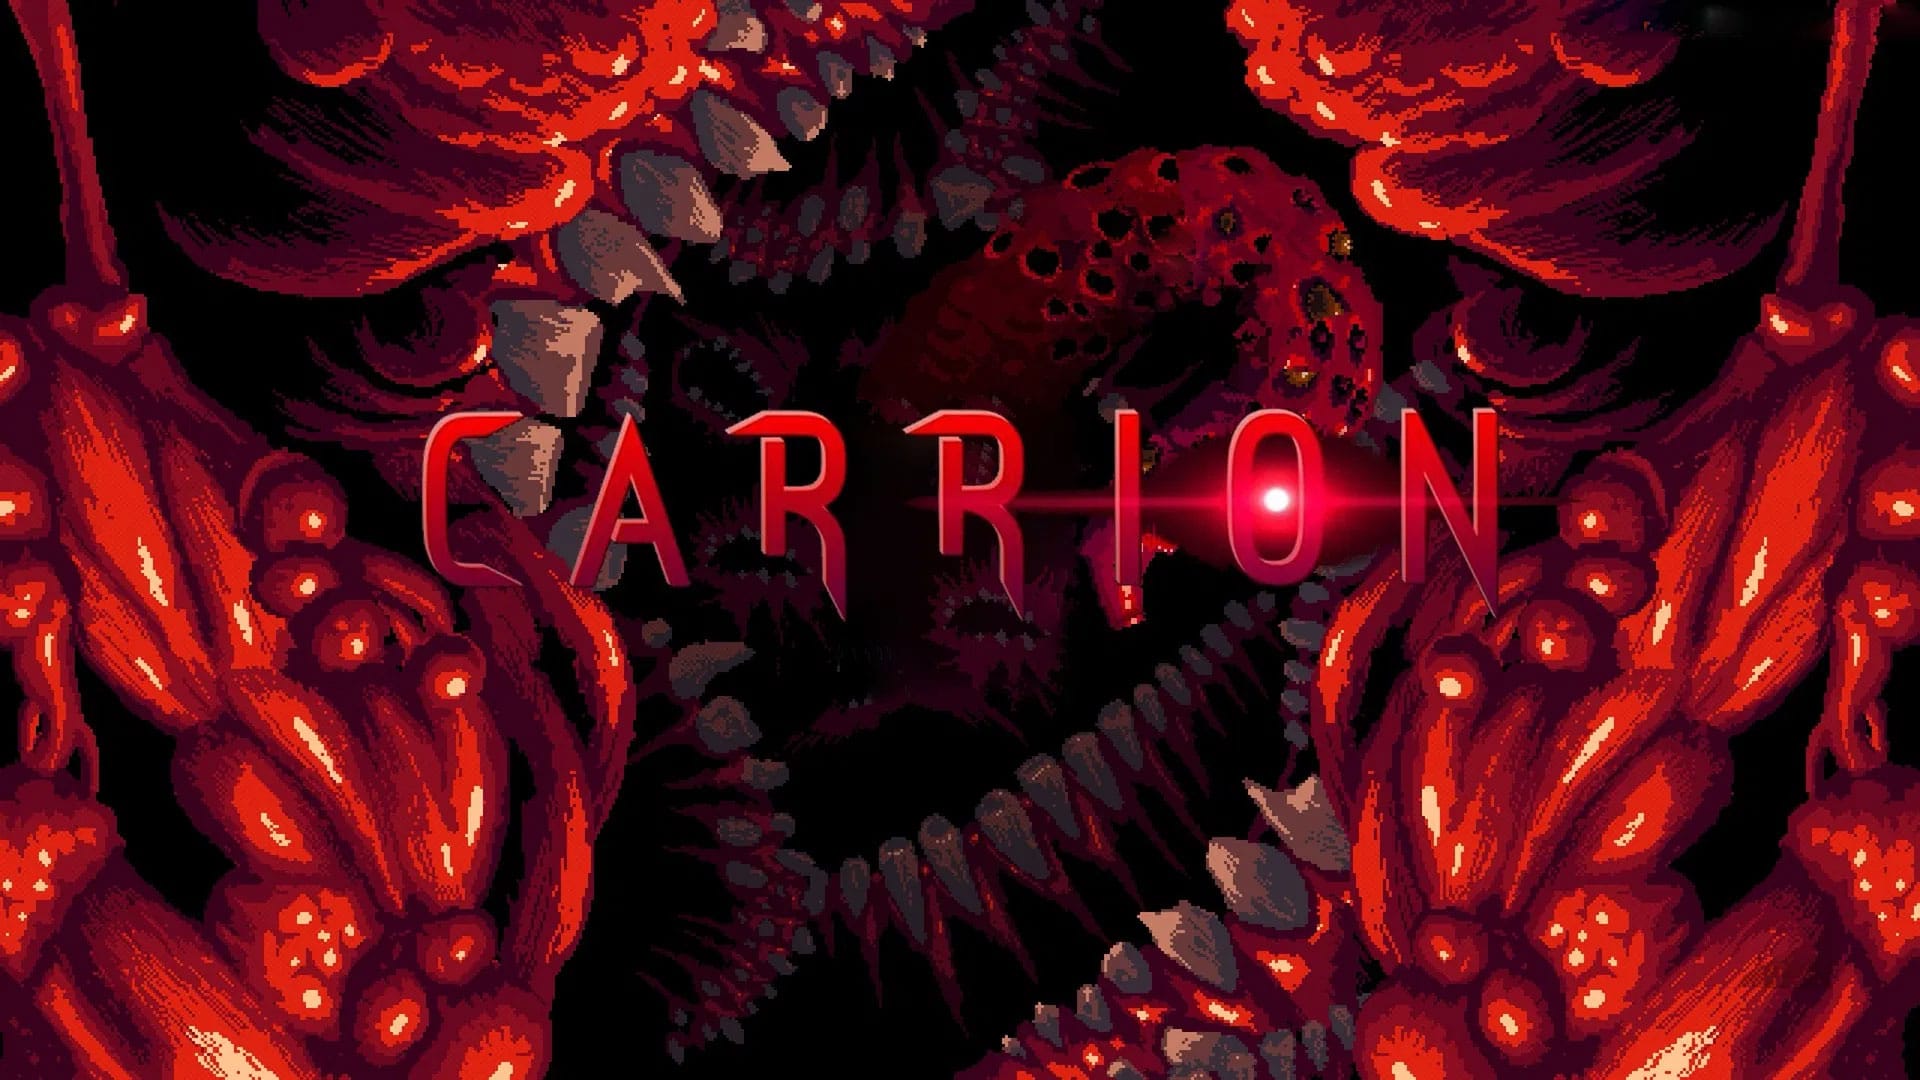 download free carrion xbox one